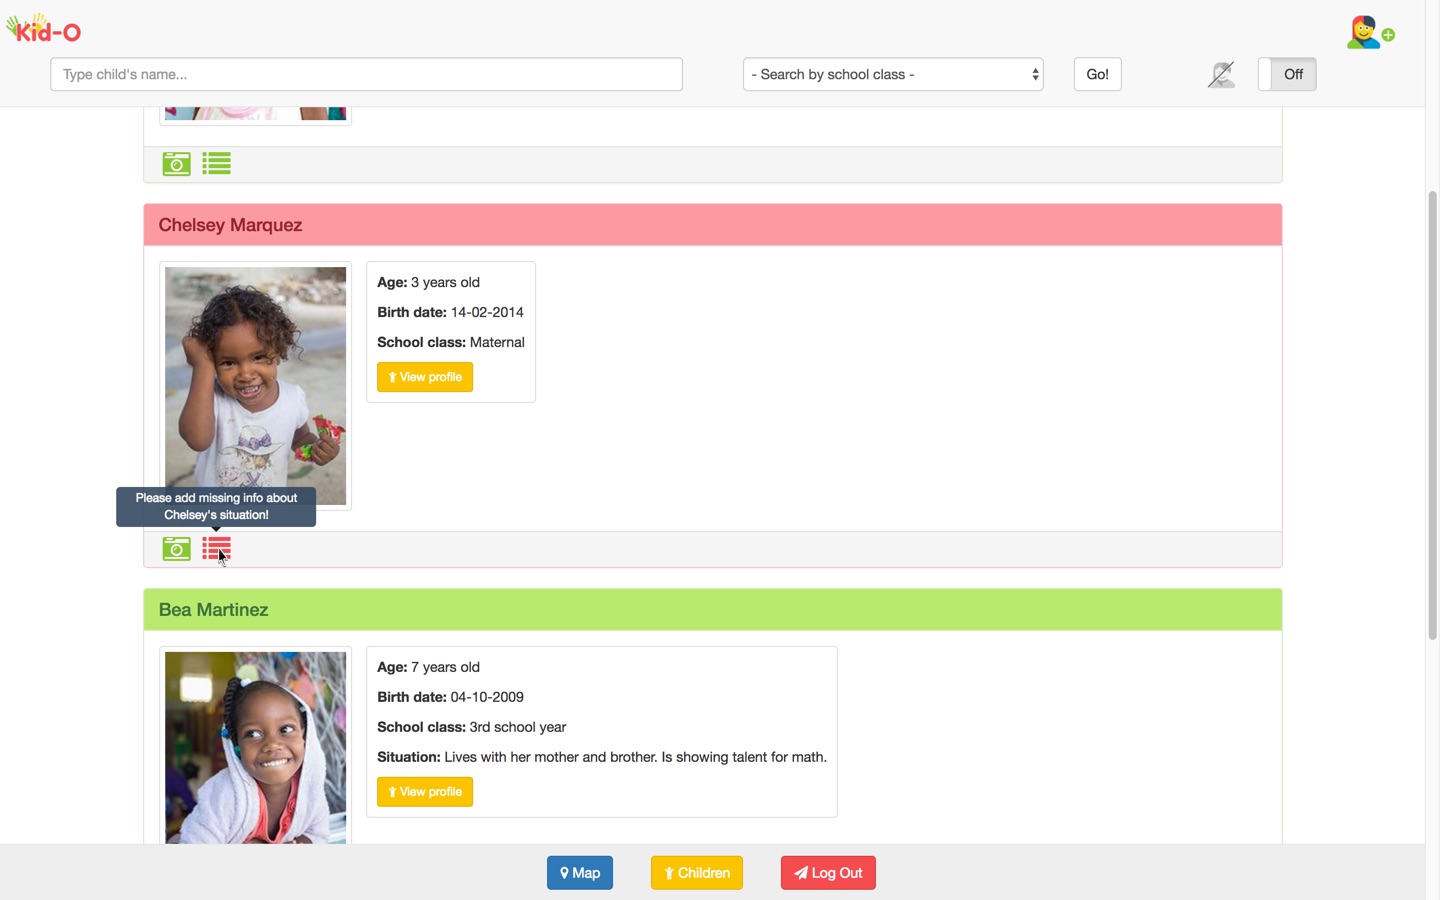 Display of missing information on the child profile preview